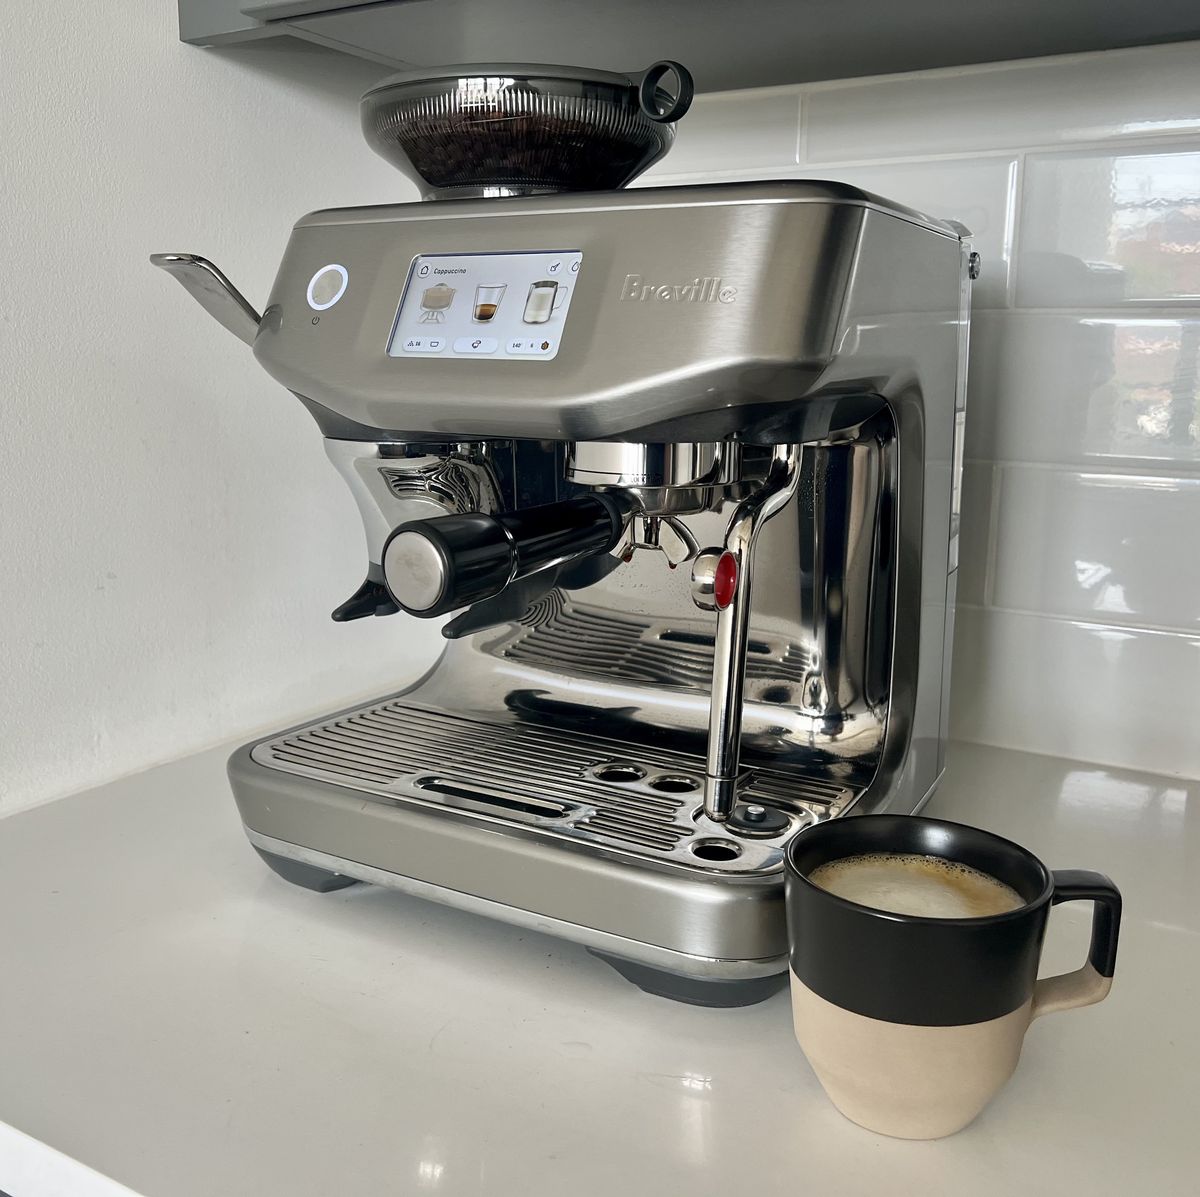 https://hips.hearstapps.com/hmg-prod.s3.amazonaws.com/images/breville-barista-touch-impress-lead-64d15e6aea099.jpg?crop=0.752xw:1.00xh;0.125xw,0&resize=1200:*